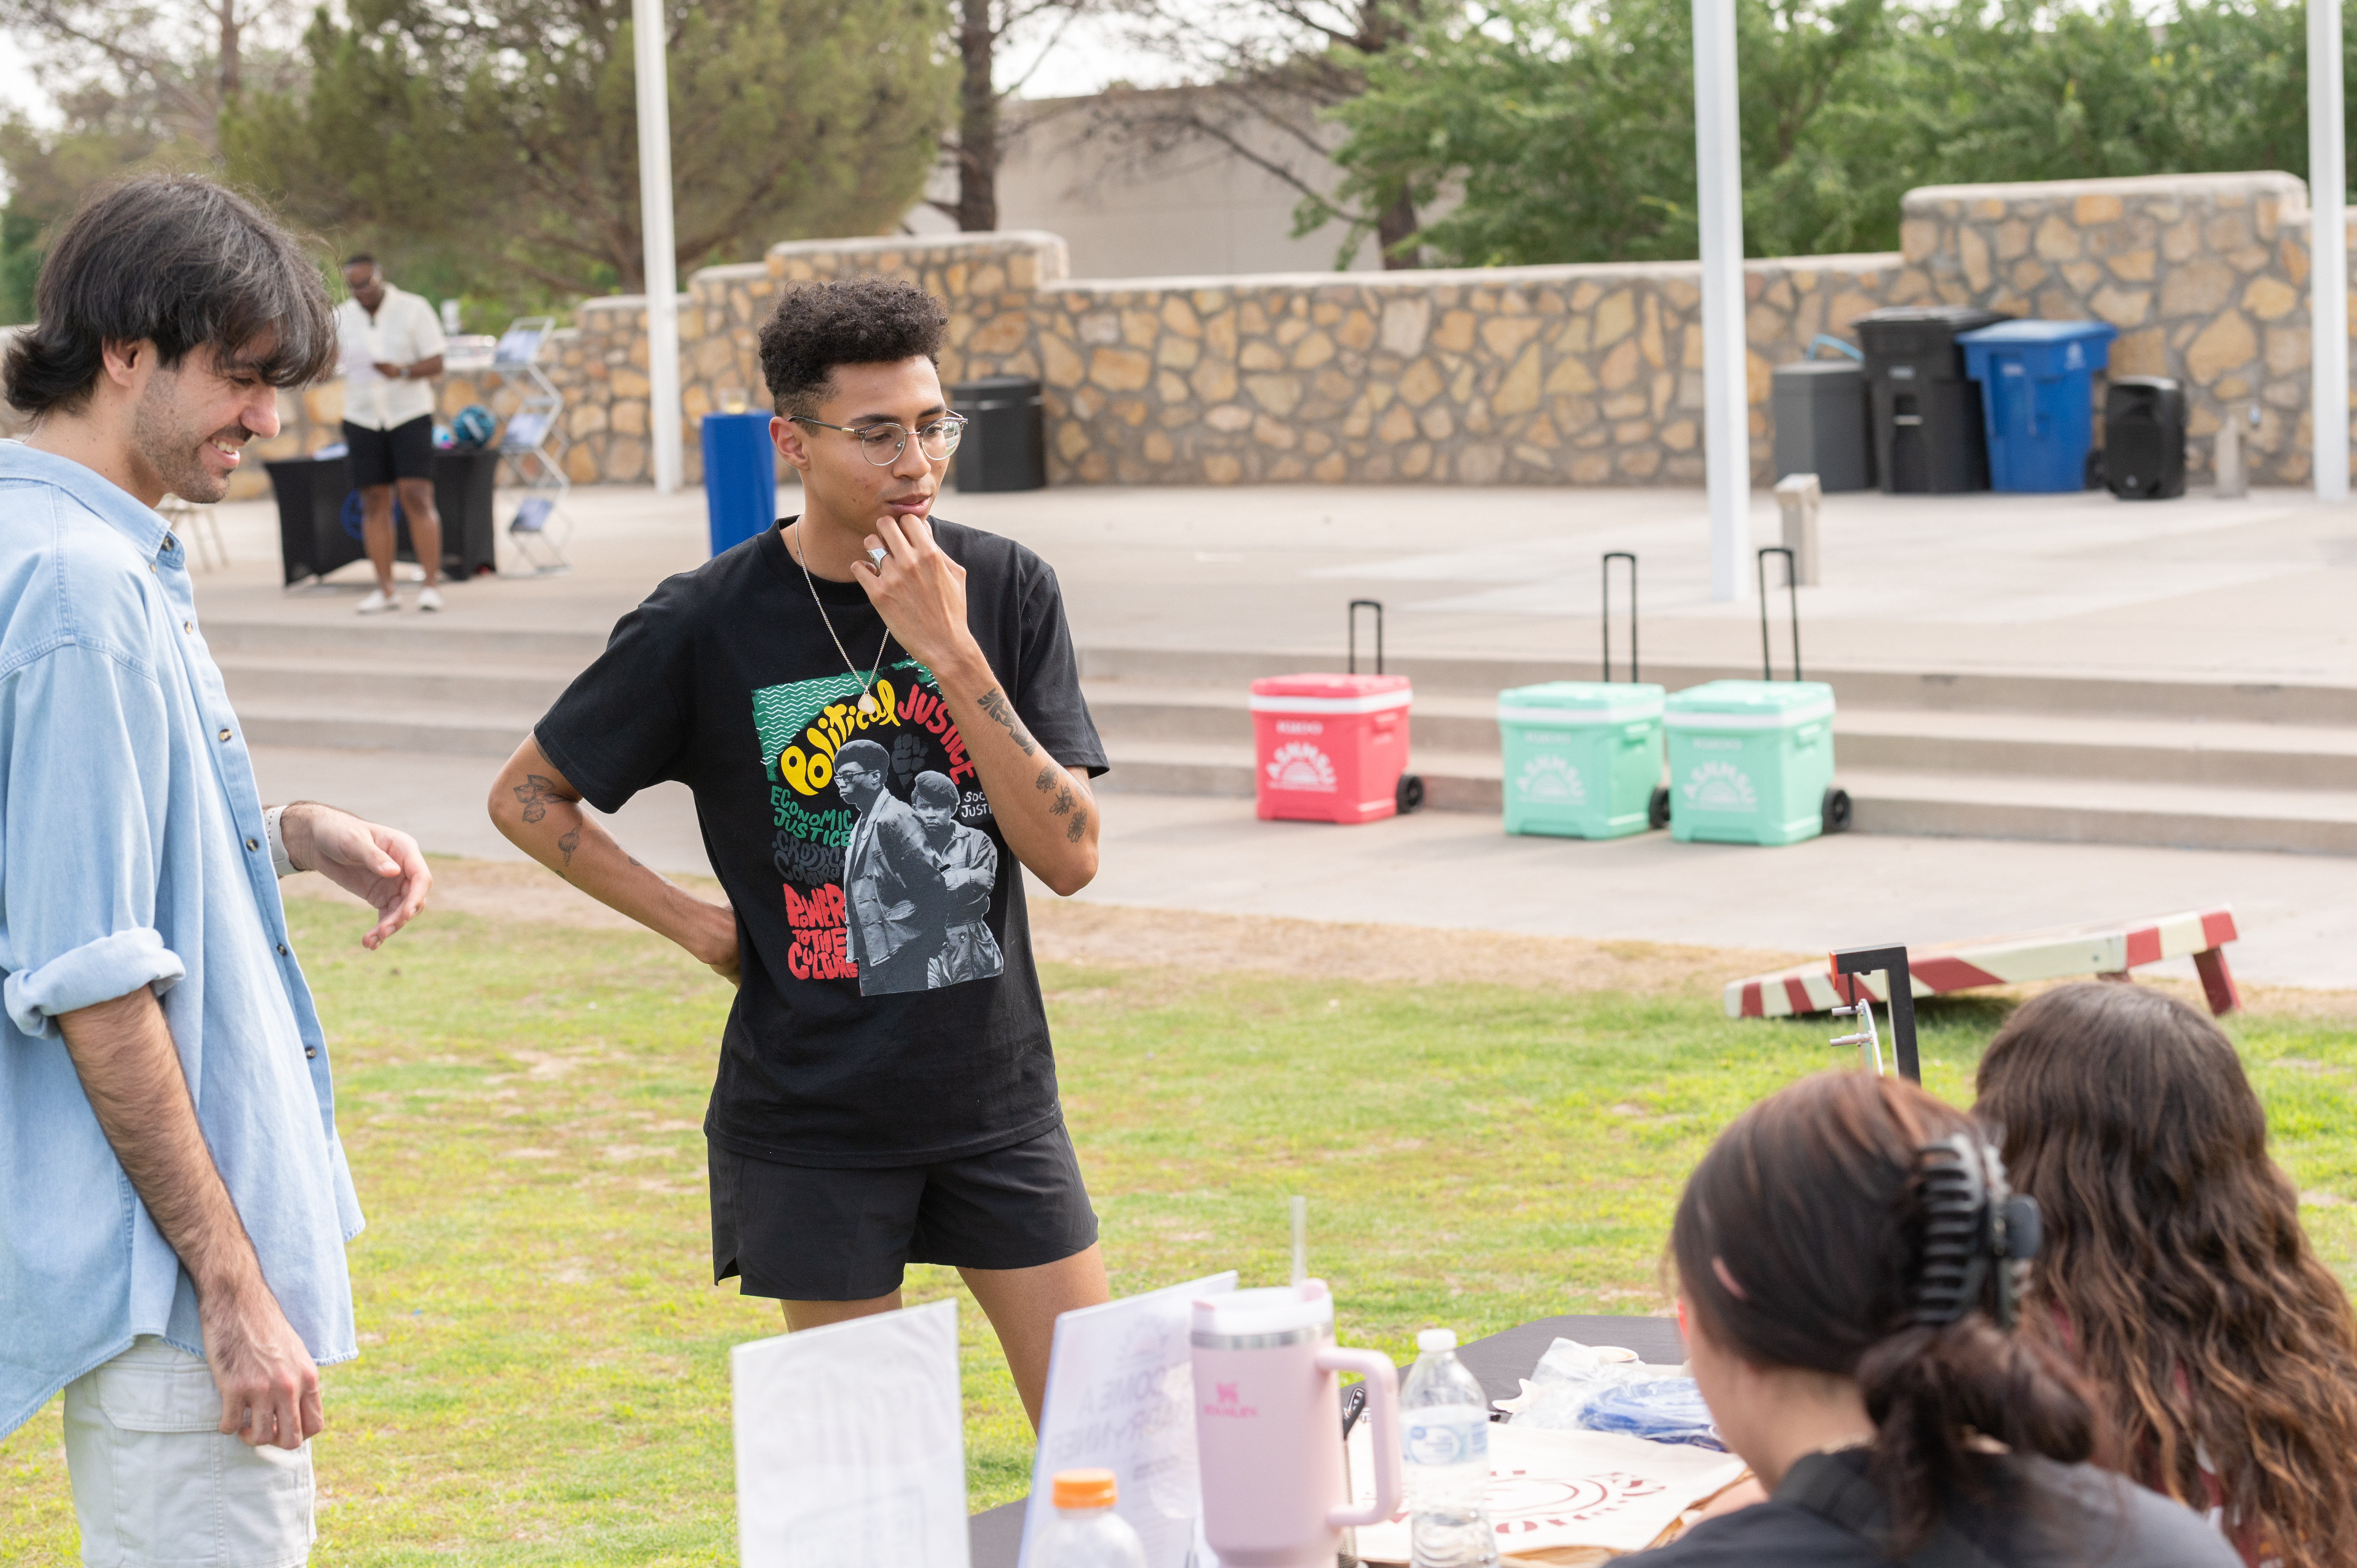 The image depicts a casual, outdoor setting with a small group of people engaged in conversation and activities. In the foreground, three individuals are interacting near a table with items placed on it, such as water bottles and a stack of papers. The person in the center, wearing glasses, a black t-shirt with text and imagery, and black shorts, has their hand on their chin and appears to be listening attentively. Another person on the left, dressed in a light blue button-up shirt and white shorts, is looking towards the person in the center, smiling. In the background, another individual is seen near a folding table with some items. Additionally, there are several color-blocked coolers and a stone wall with blue and black trash bins nearby. The scene is set on a grassy area with step-like stone seating and trees in the background.